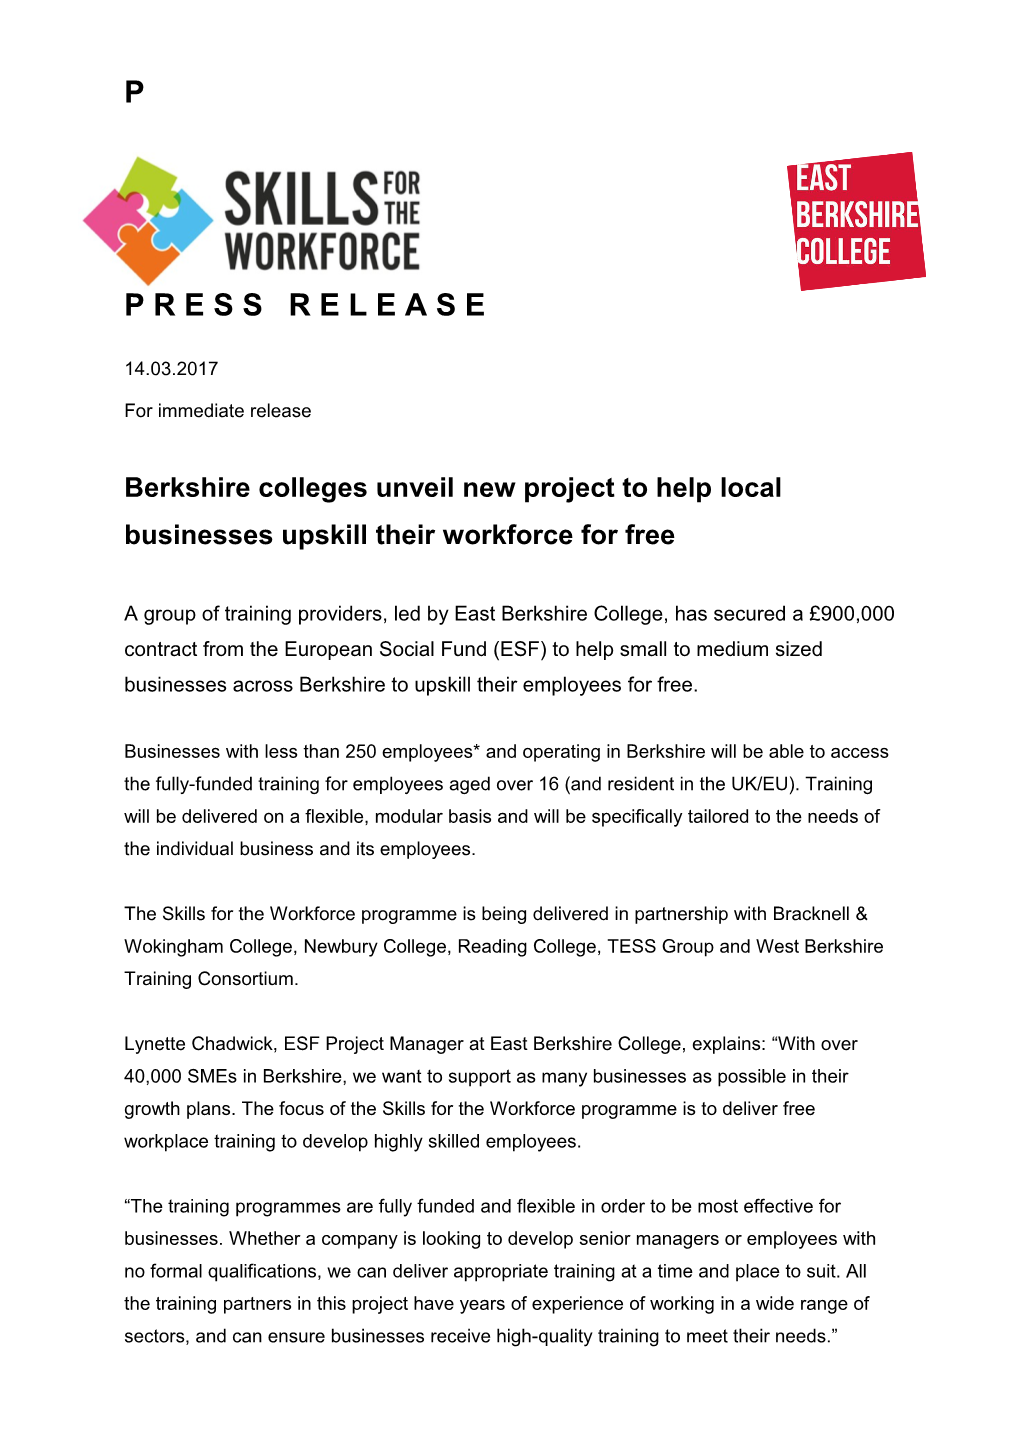 Berkshire Colleges Unveil New Project to Help Local Businesses Upskill Their Workforce